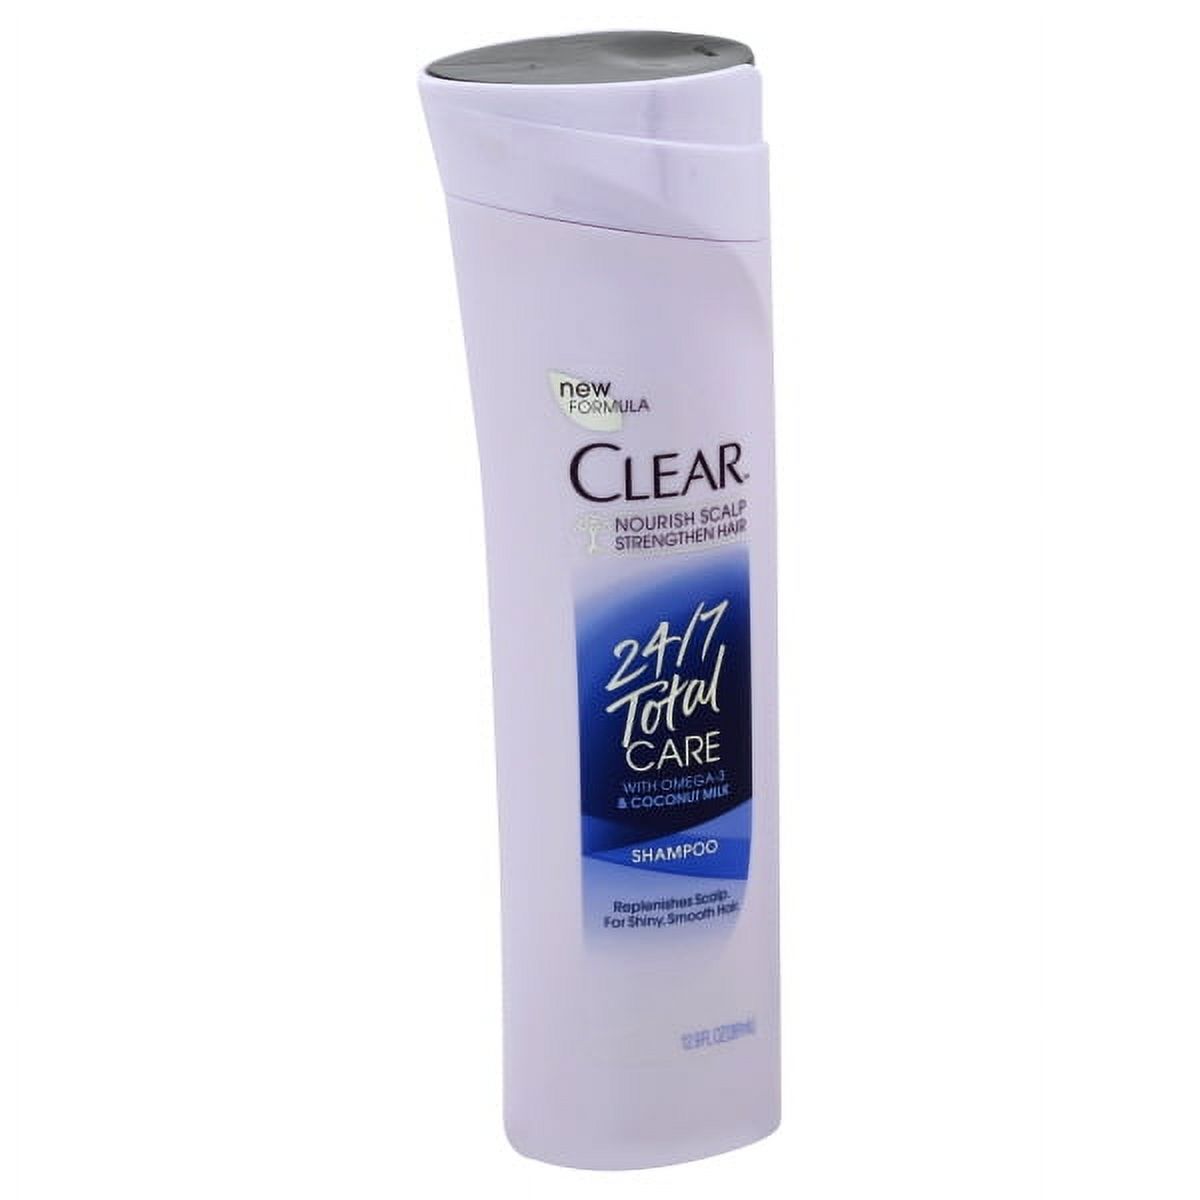 Clear 24/7 Total Care With Omega-3 Coconut Milk Shampoo 12.9 oz - image 1 of 5